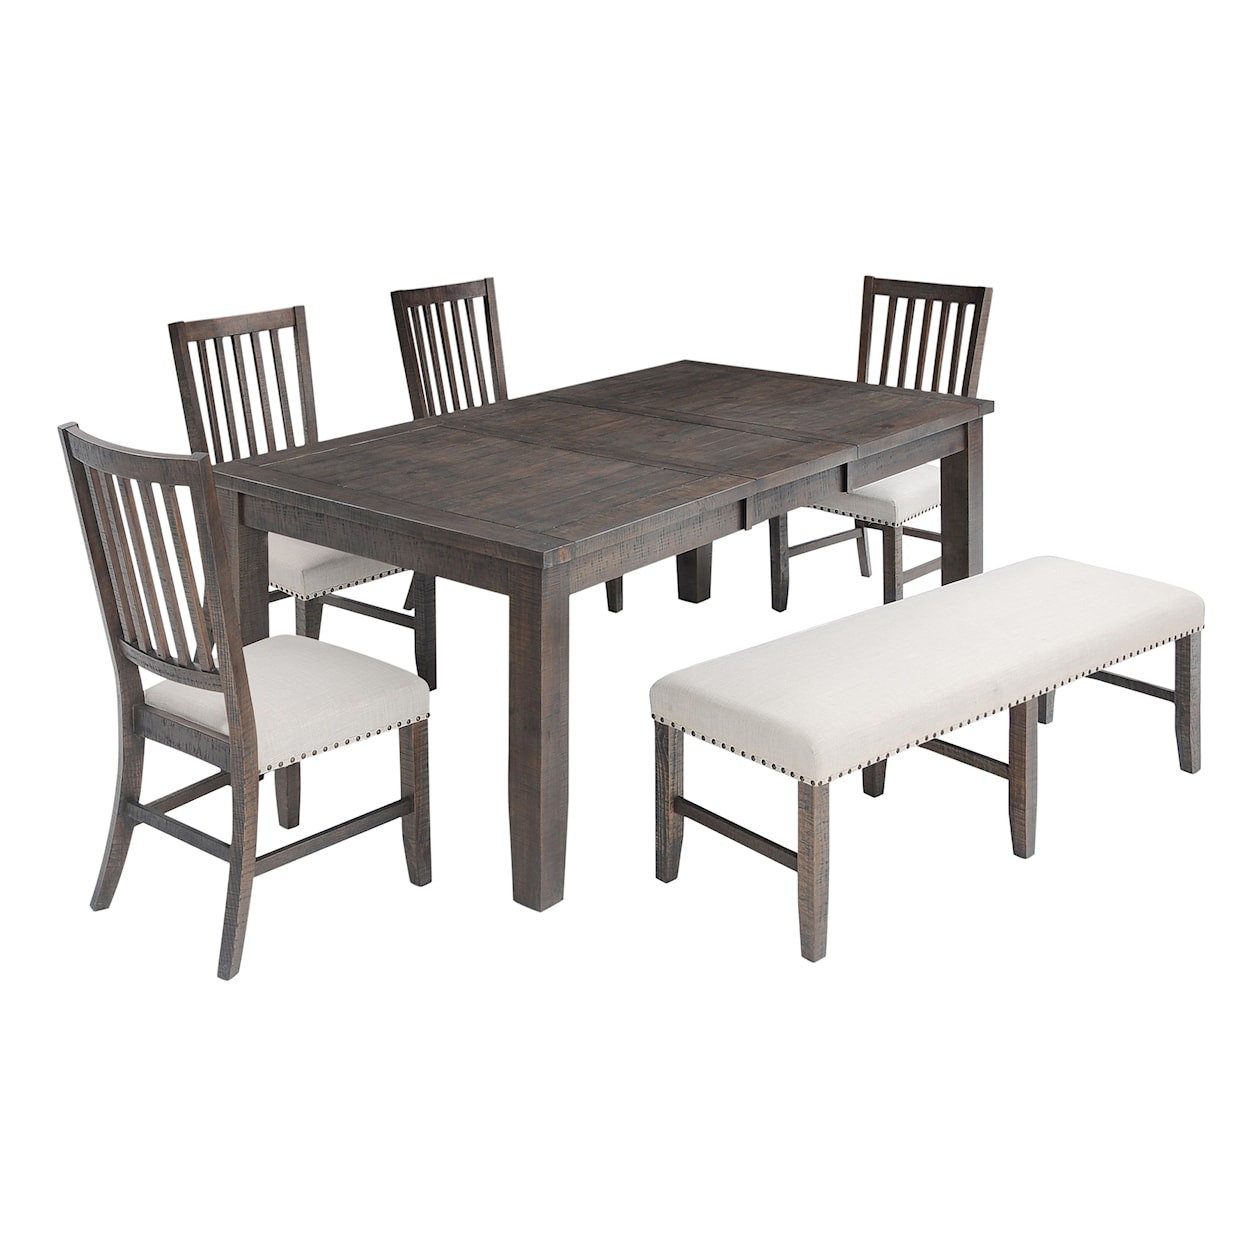 VFM Signature Willow Creek Extension Dining Table